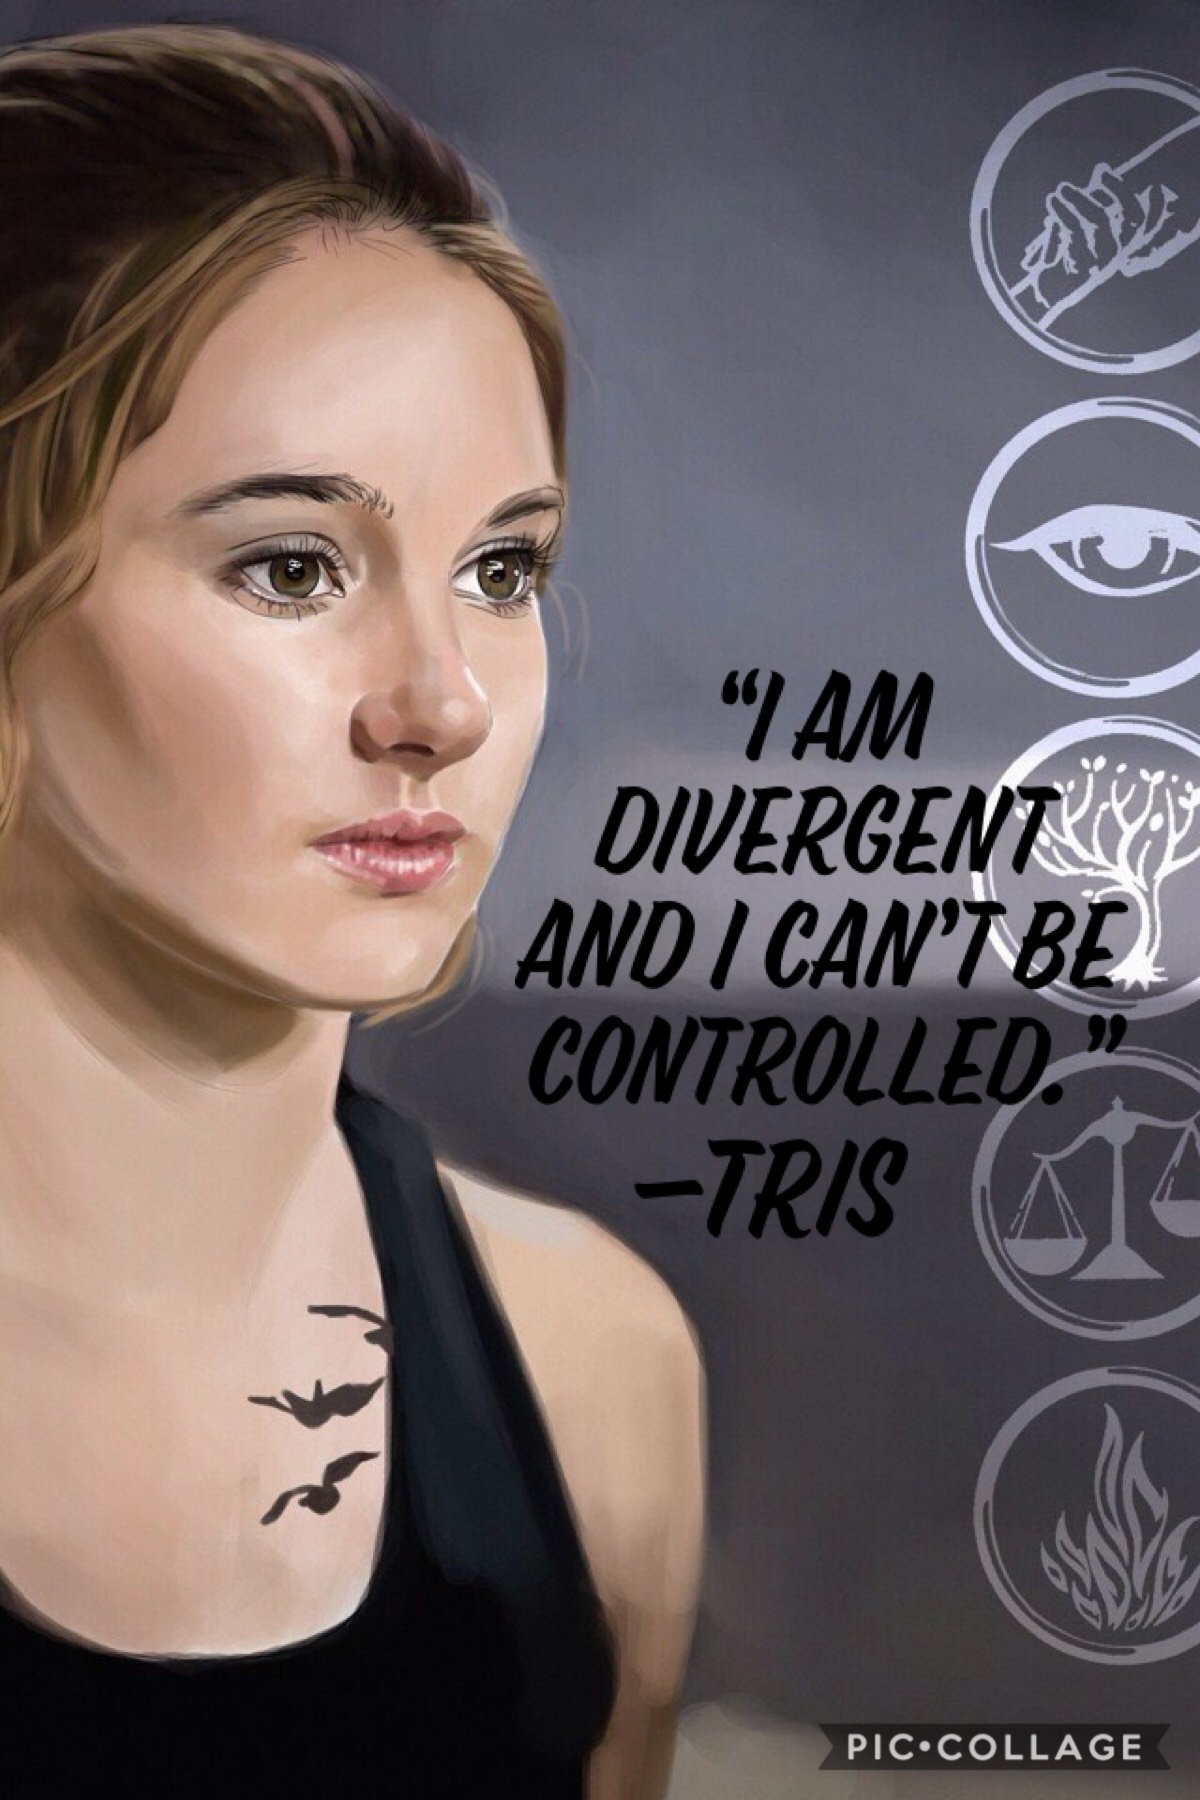 Tap!!!!!! 
❤️I love divergent!!❤️
qotd: books or movies?
aotd: books!!!
Remember.... my fall themed contest is over on Friday!
